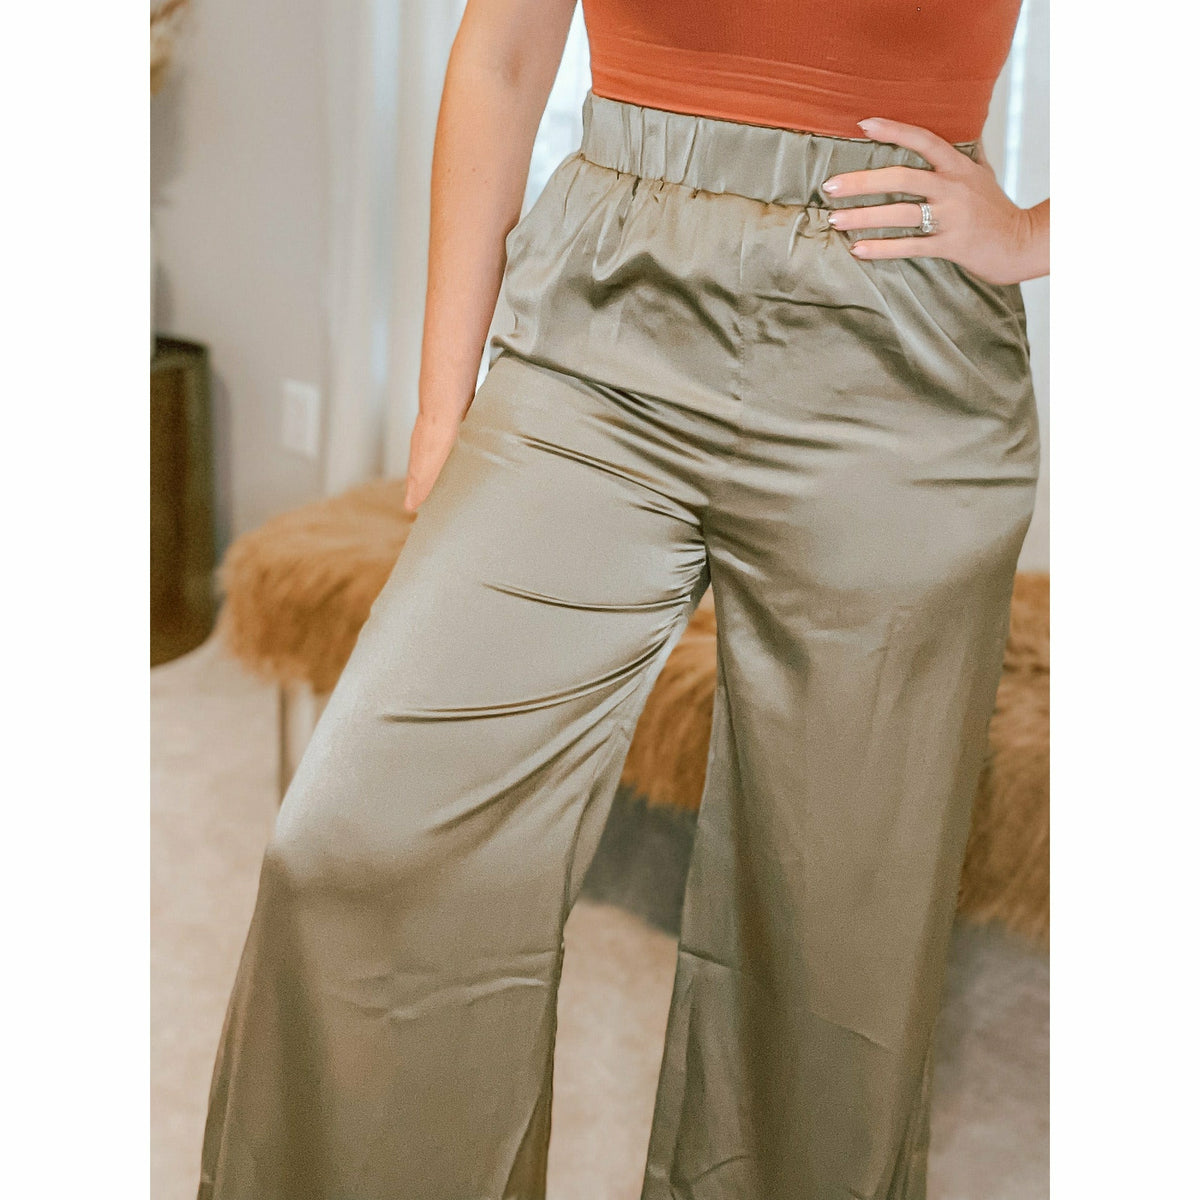 Vivica Palazzo Pants - The Hive by Chris Jesselle